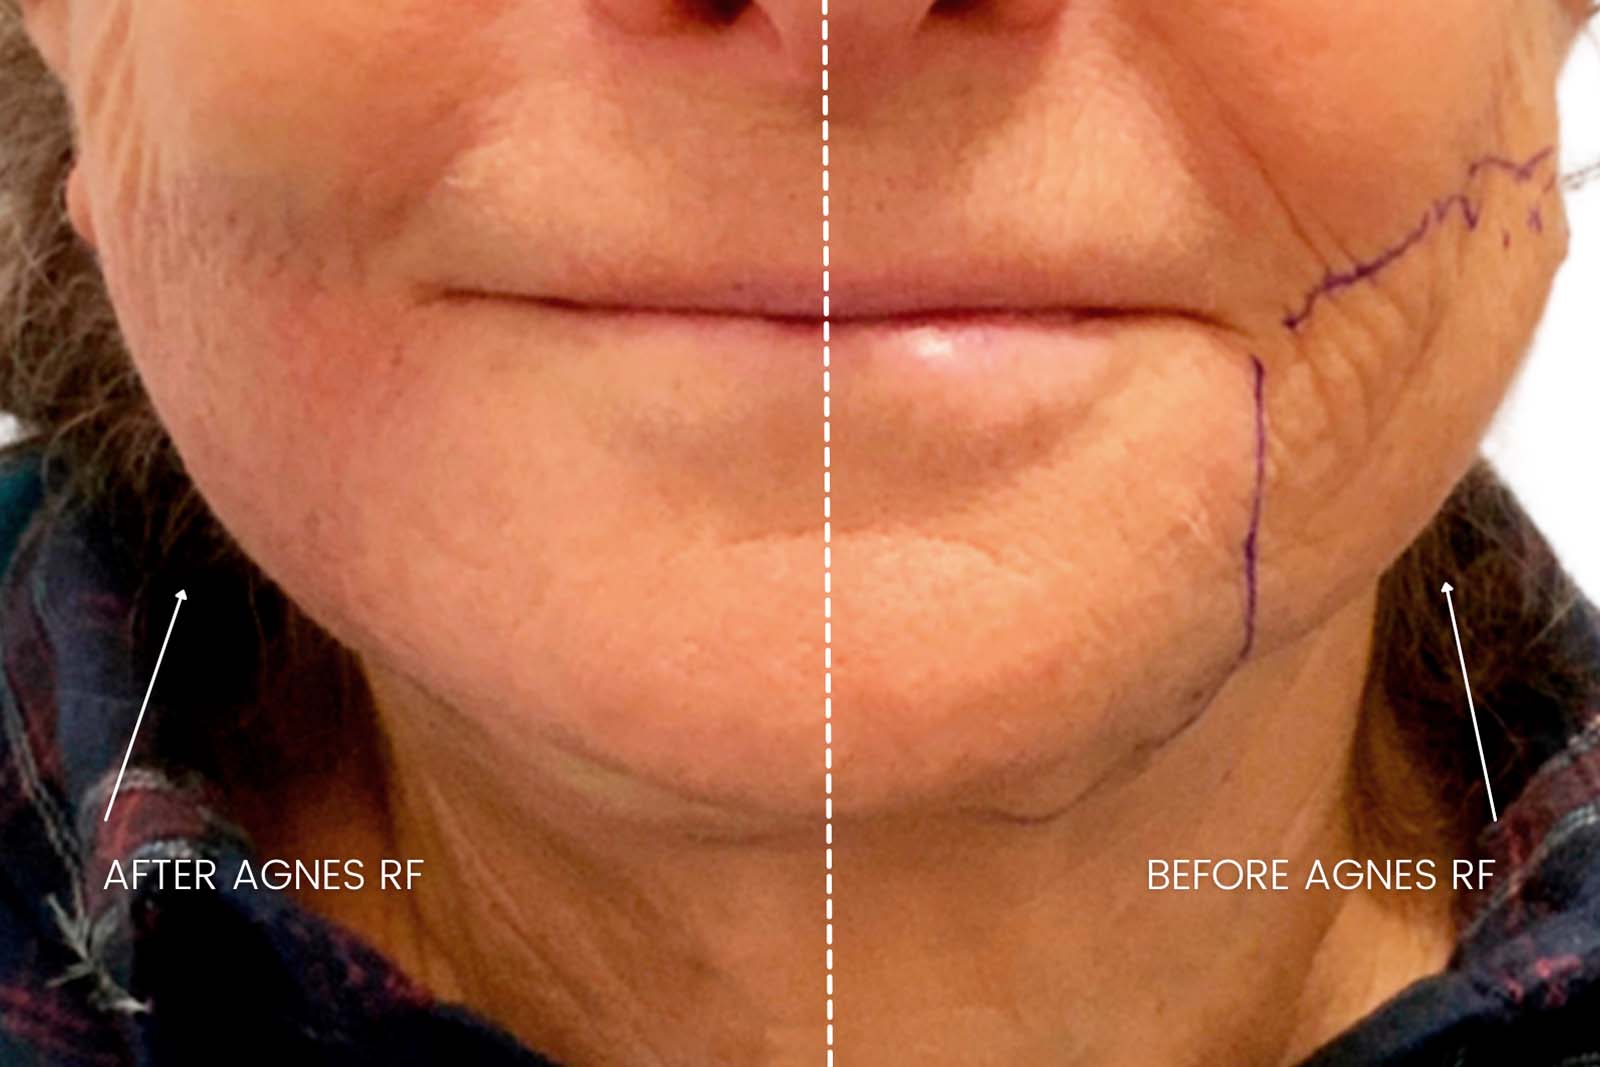 Radio Frequency Microneedling Jowl Fat Elimination with Agnes RF